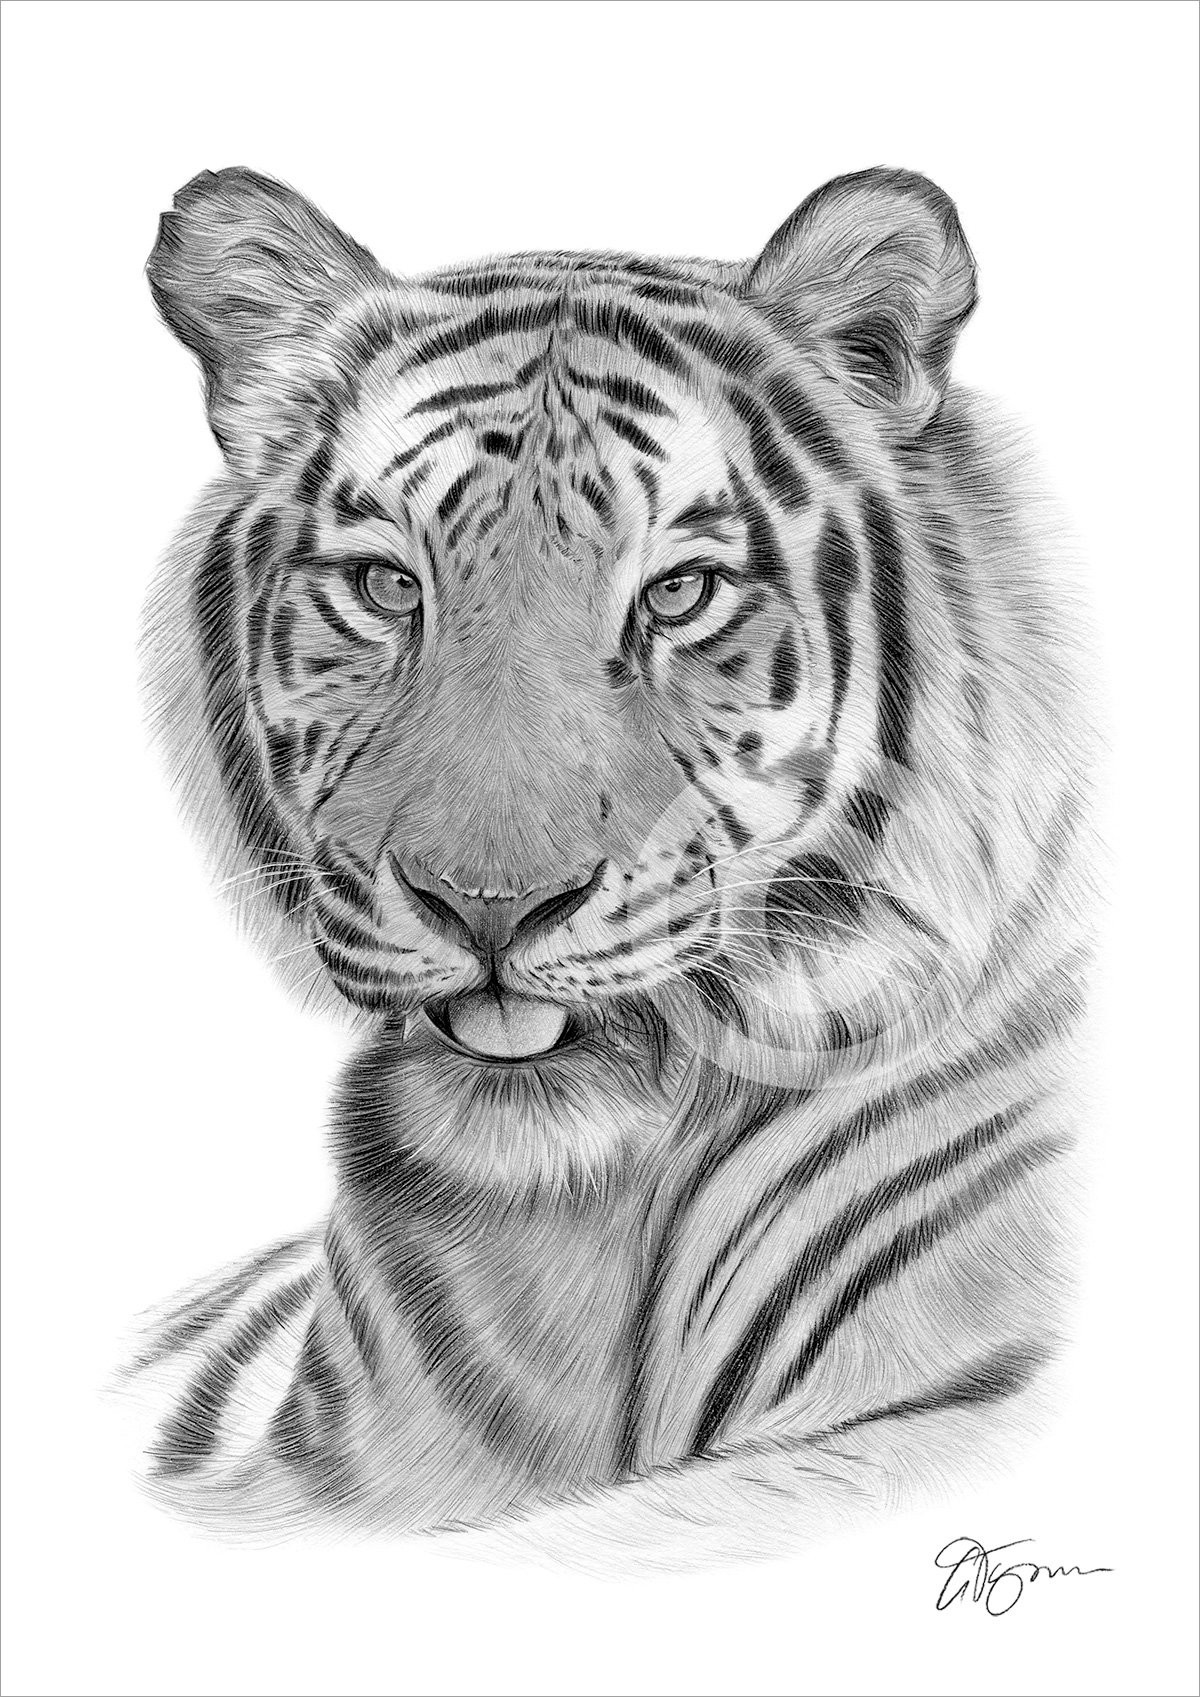 Creative Sketch Drawings Of Tigers for Adult